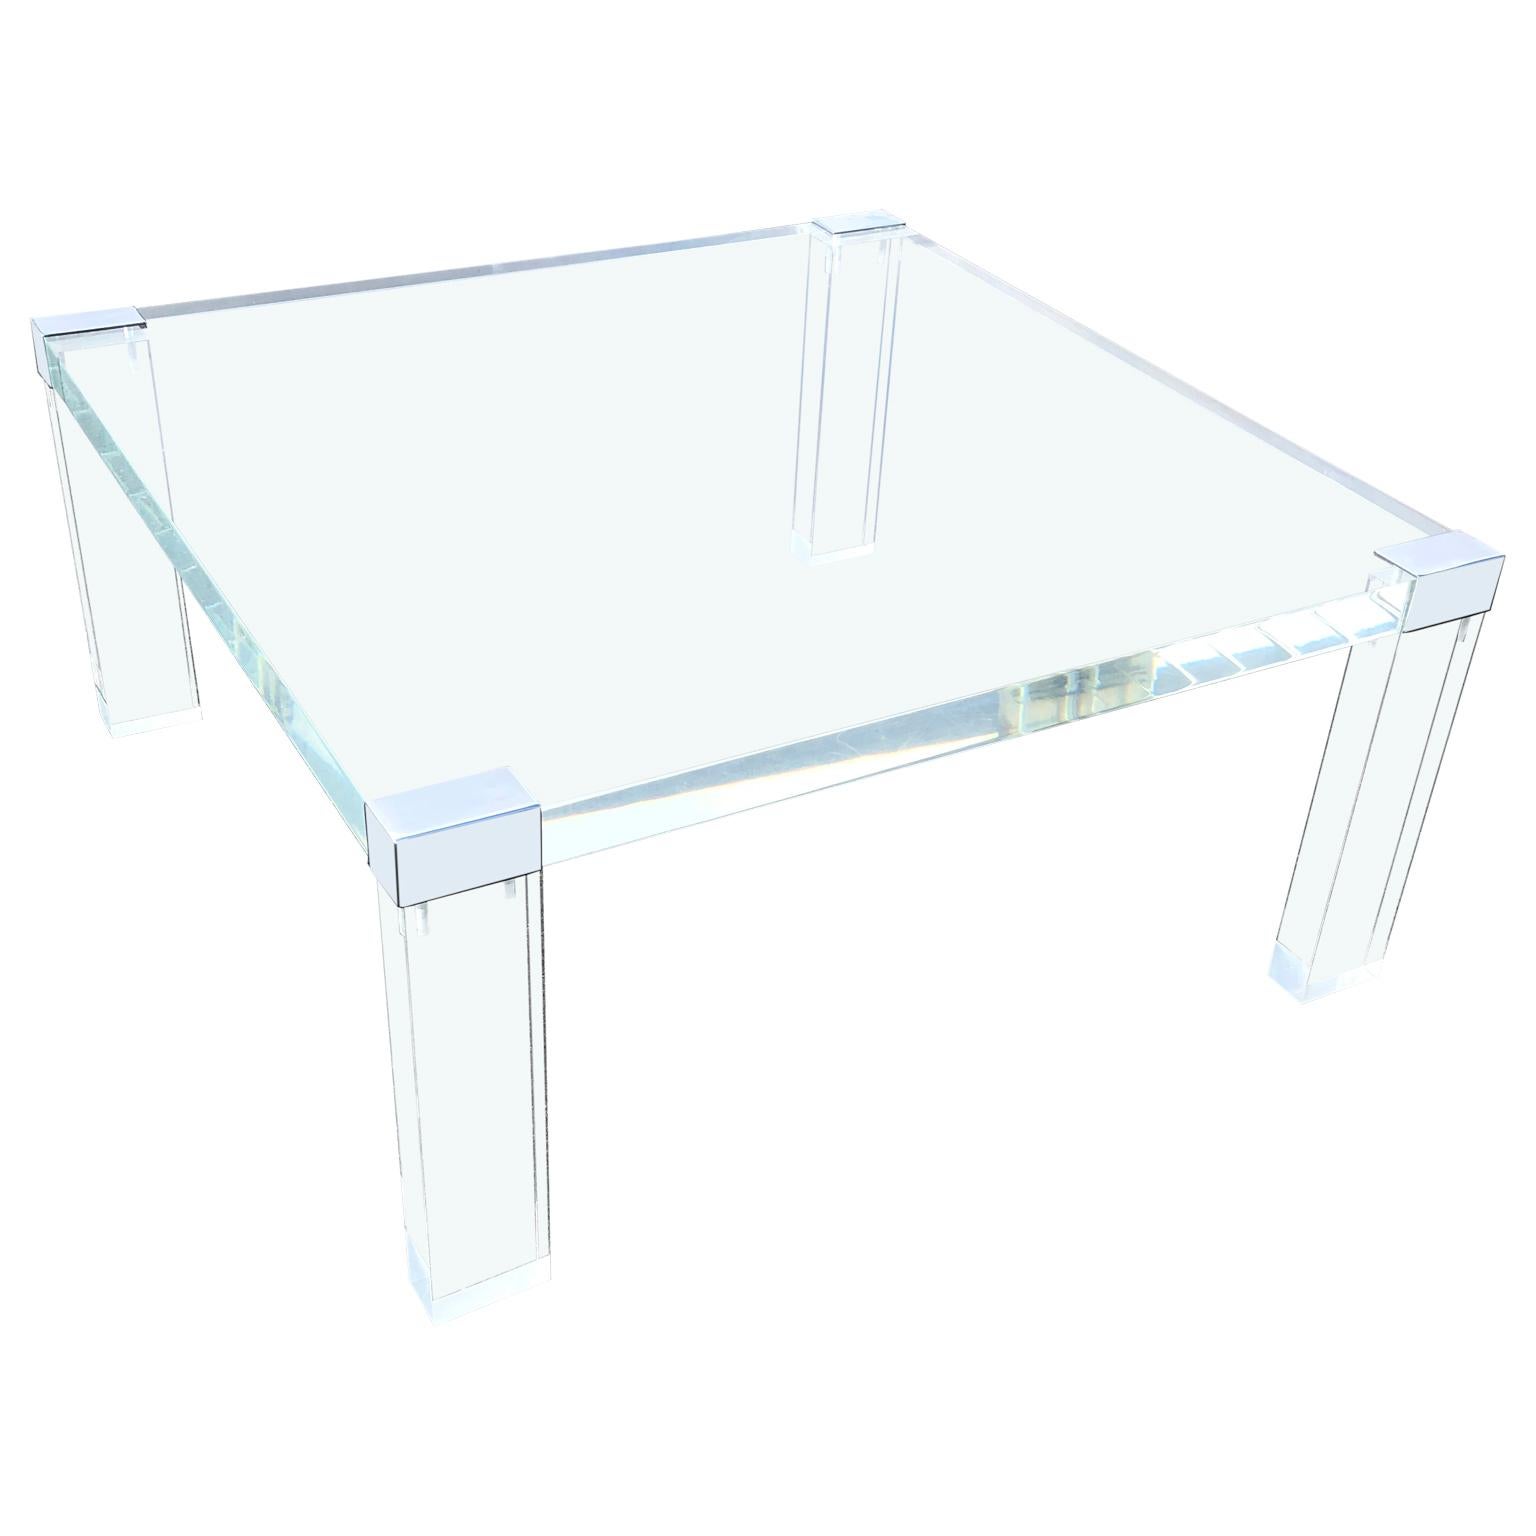 Italian Square Lucite And Chrome Coffee Or Cocktail Table